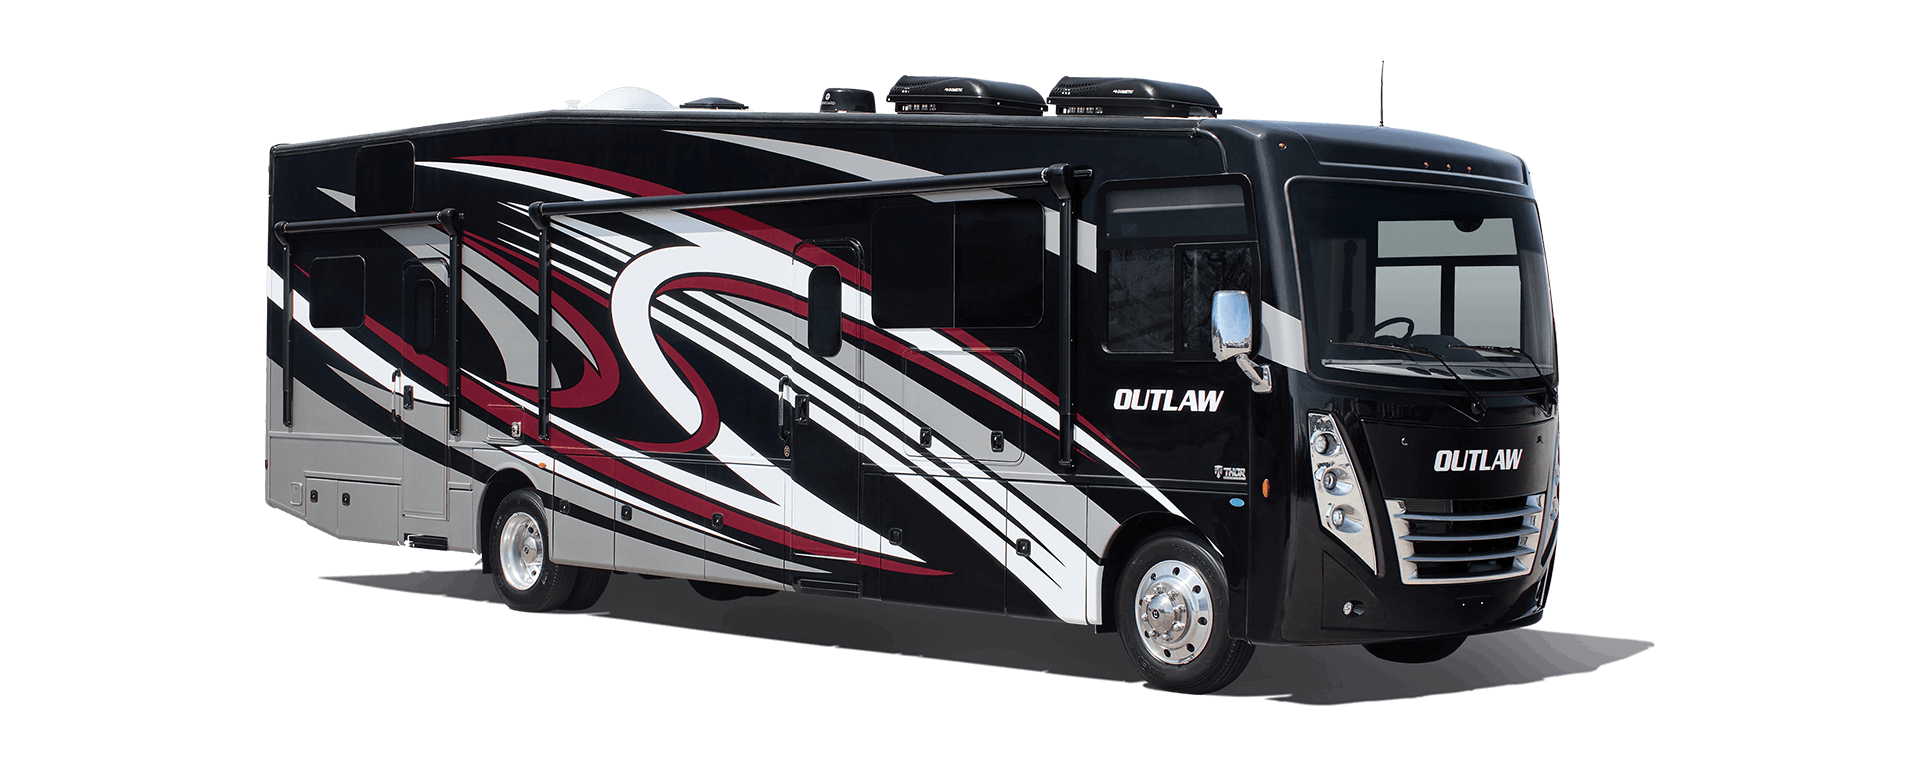 2023 Thor Outlaw Class A Toy Hauler RV Aftershock Exterior Photo